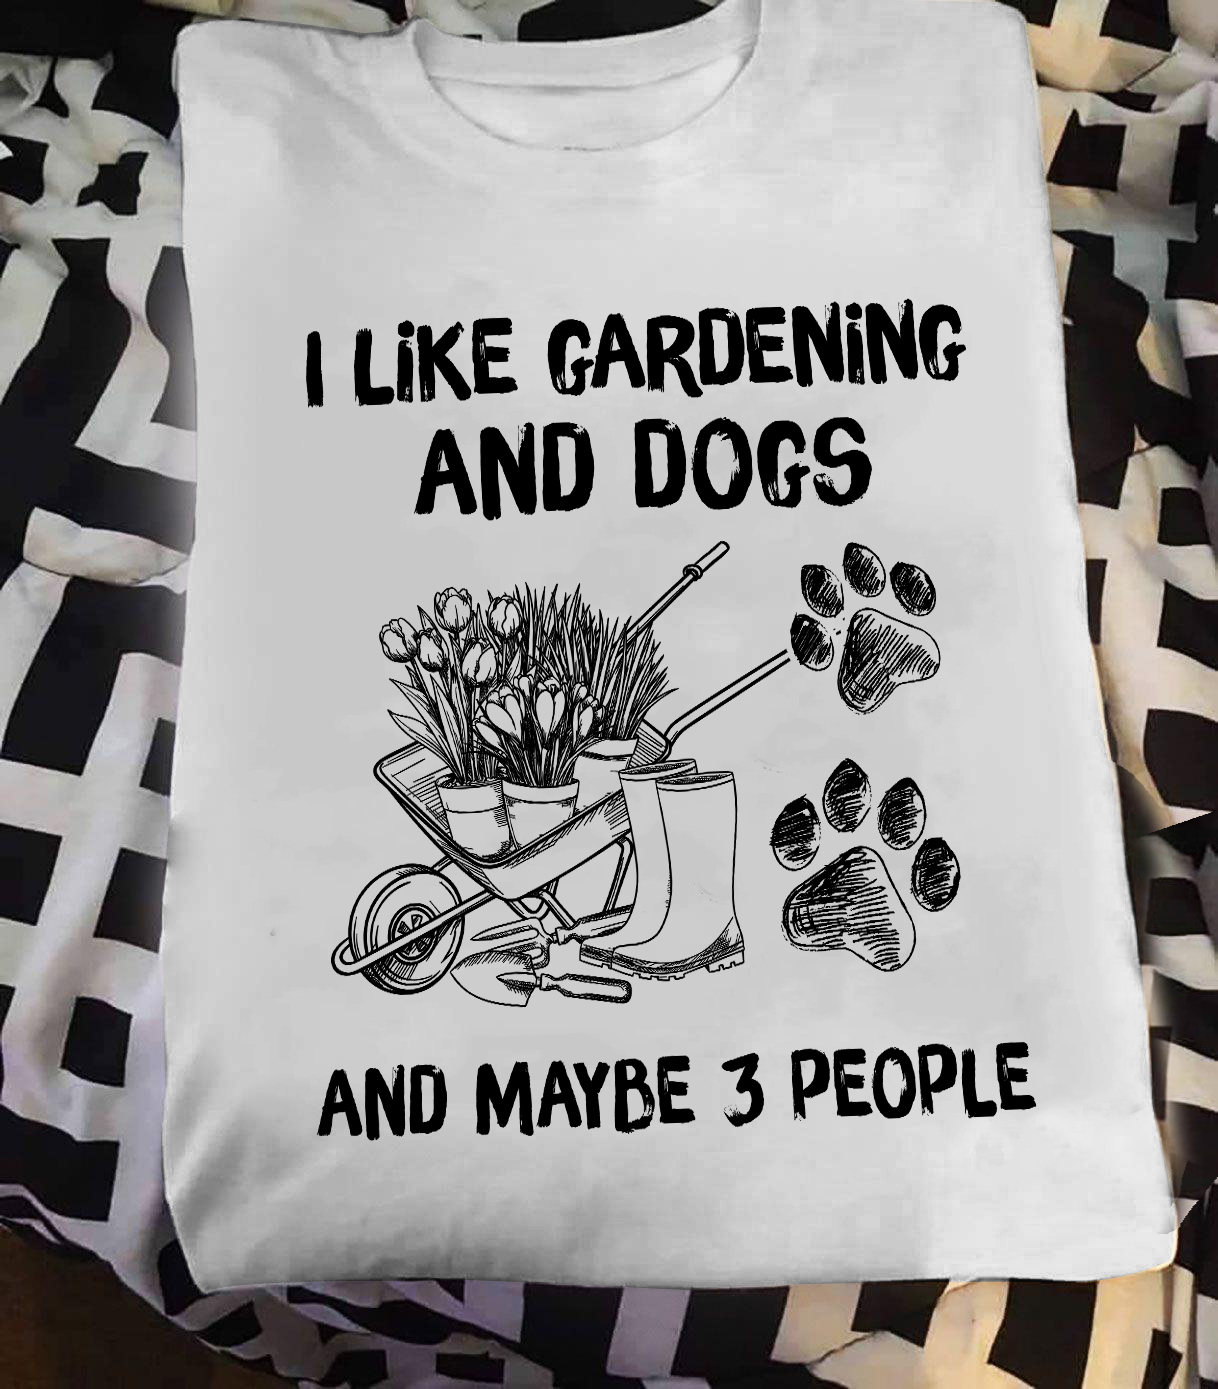 I like gardening and dogs and maybe 3 people